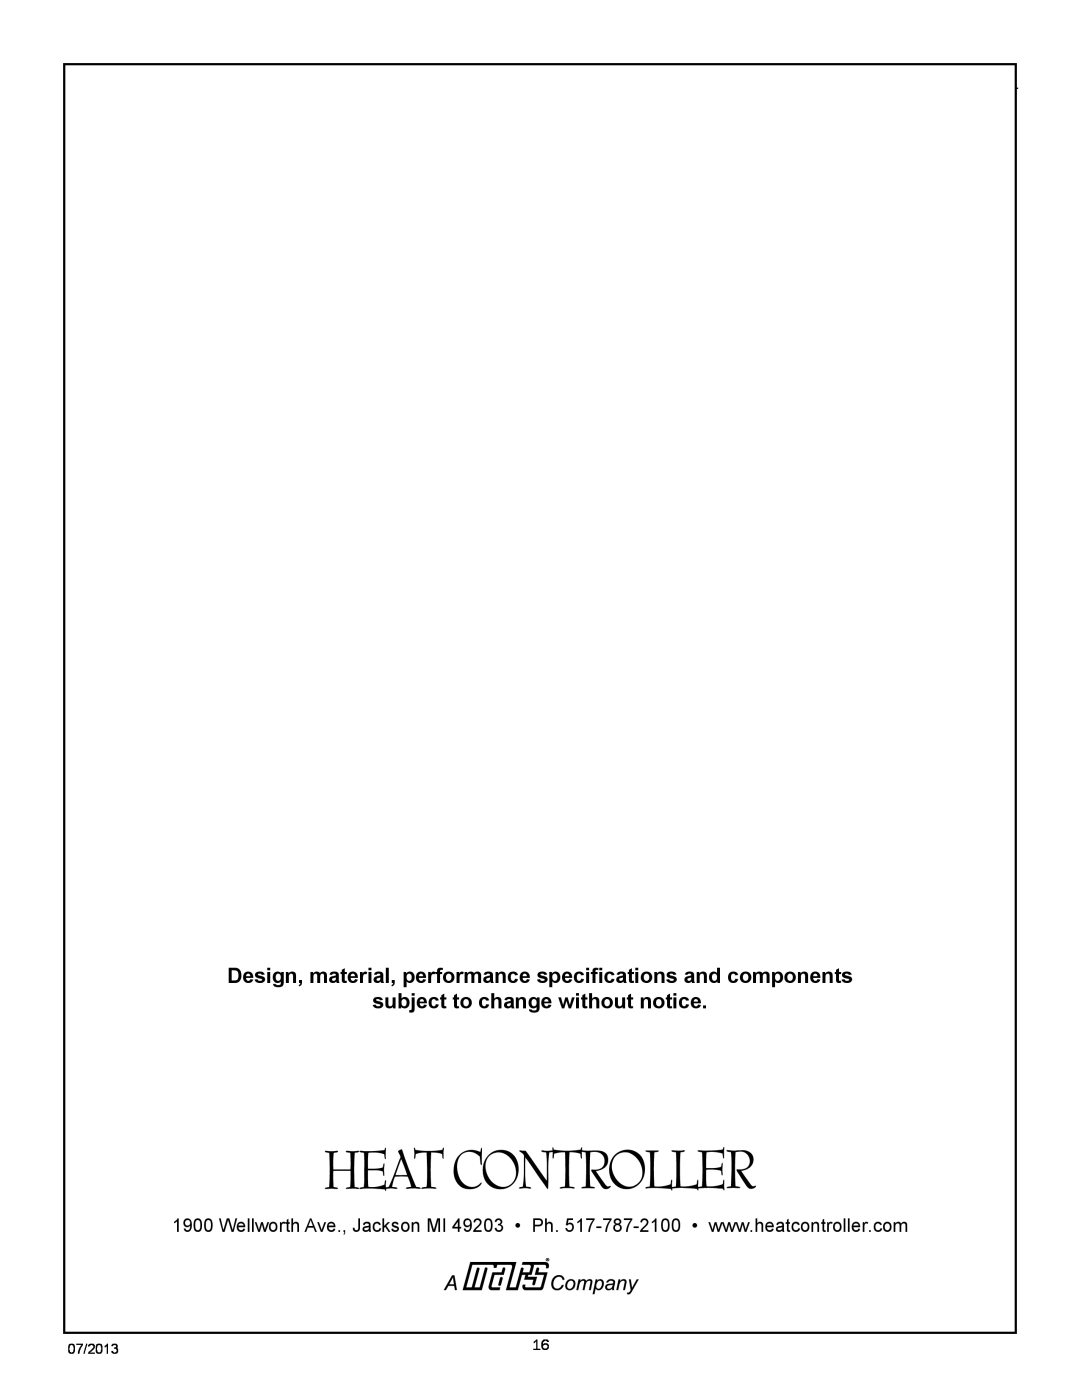 Heat Controller DVC/DVH SERIES manual subject to change without notice, DVC/DVH Remote Controller, Heat Controller, 07/2013 